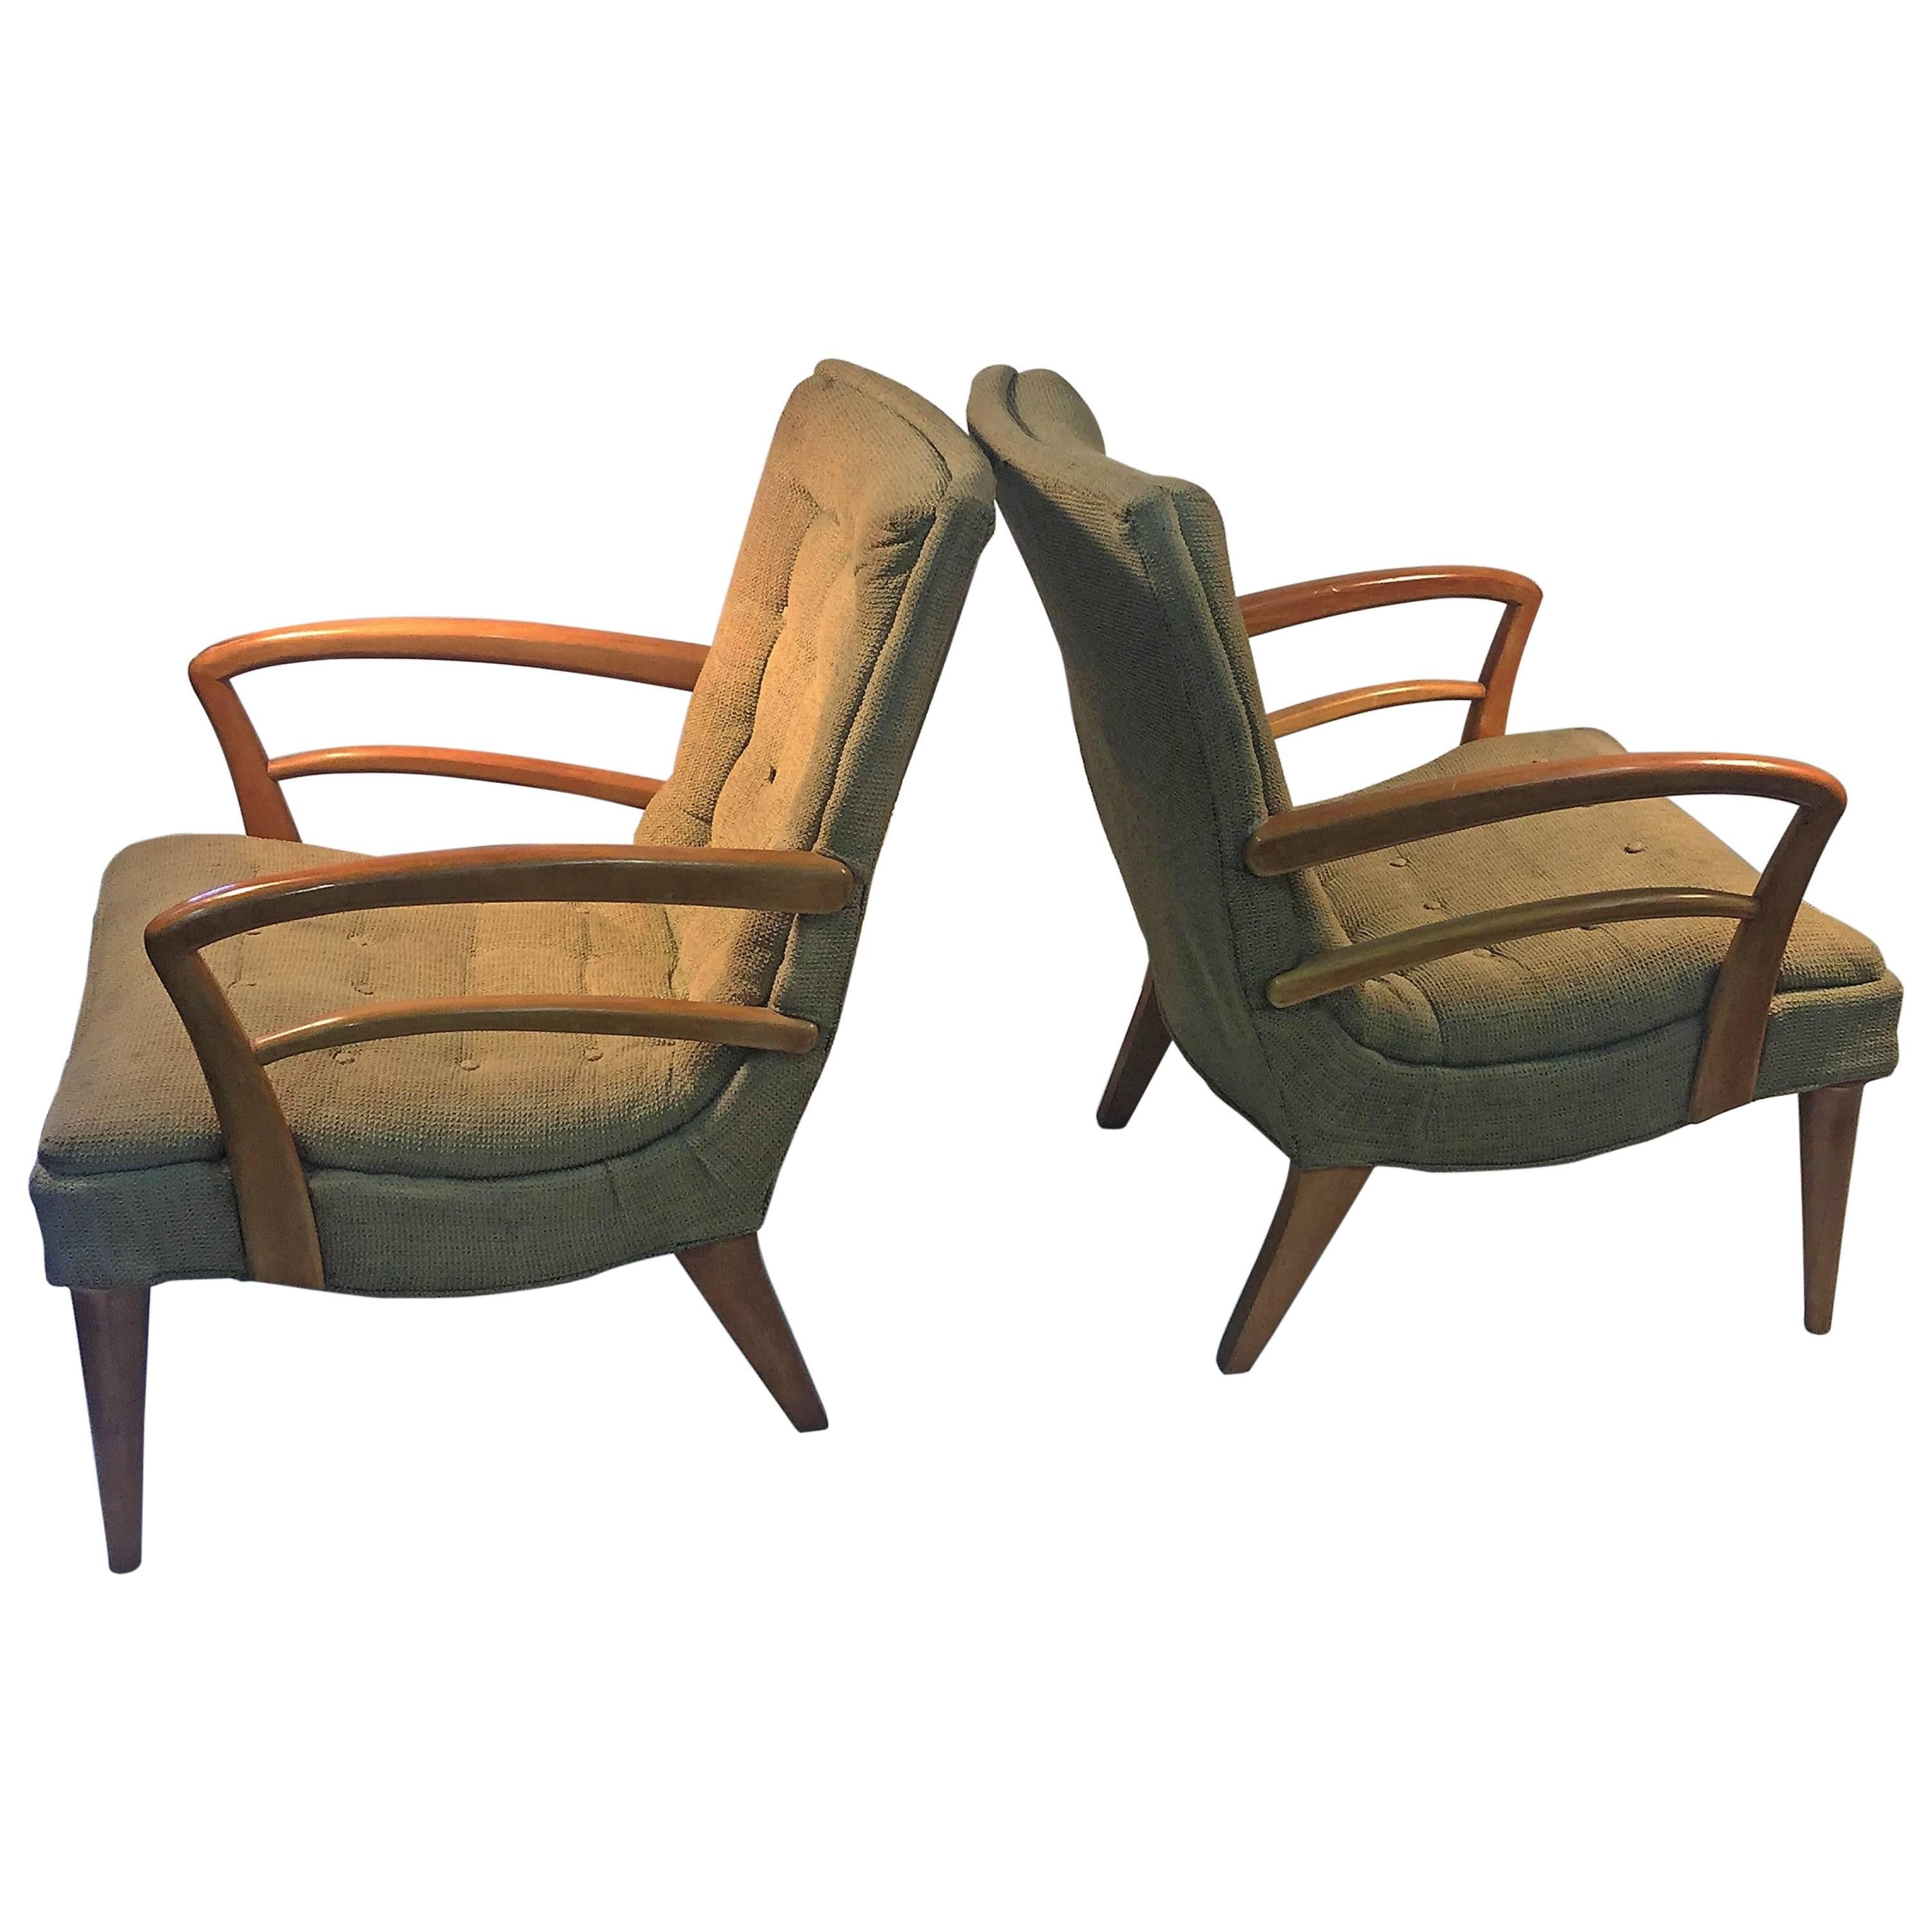  Modernist Art Deco Pair of KEM Weber Lounge Chairs For Sale